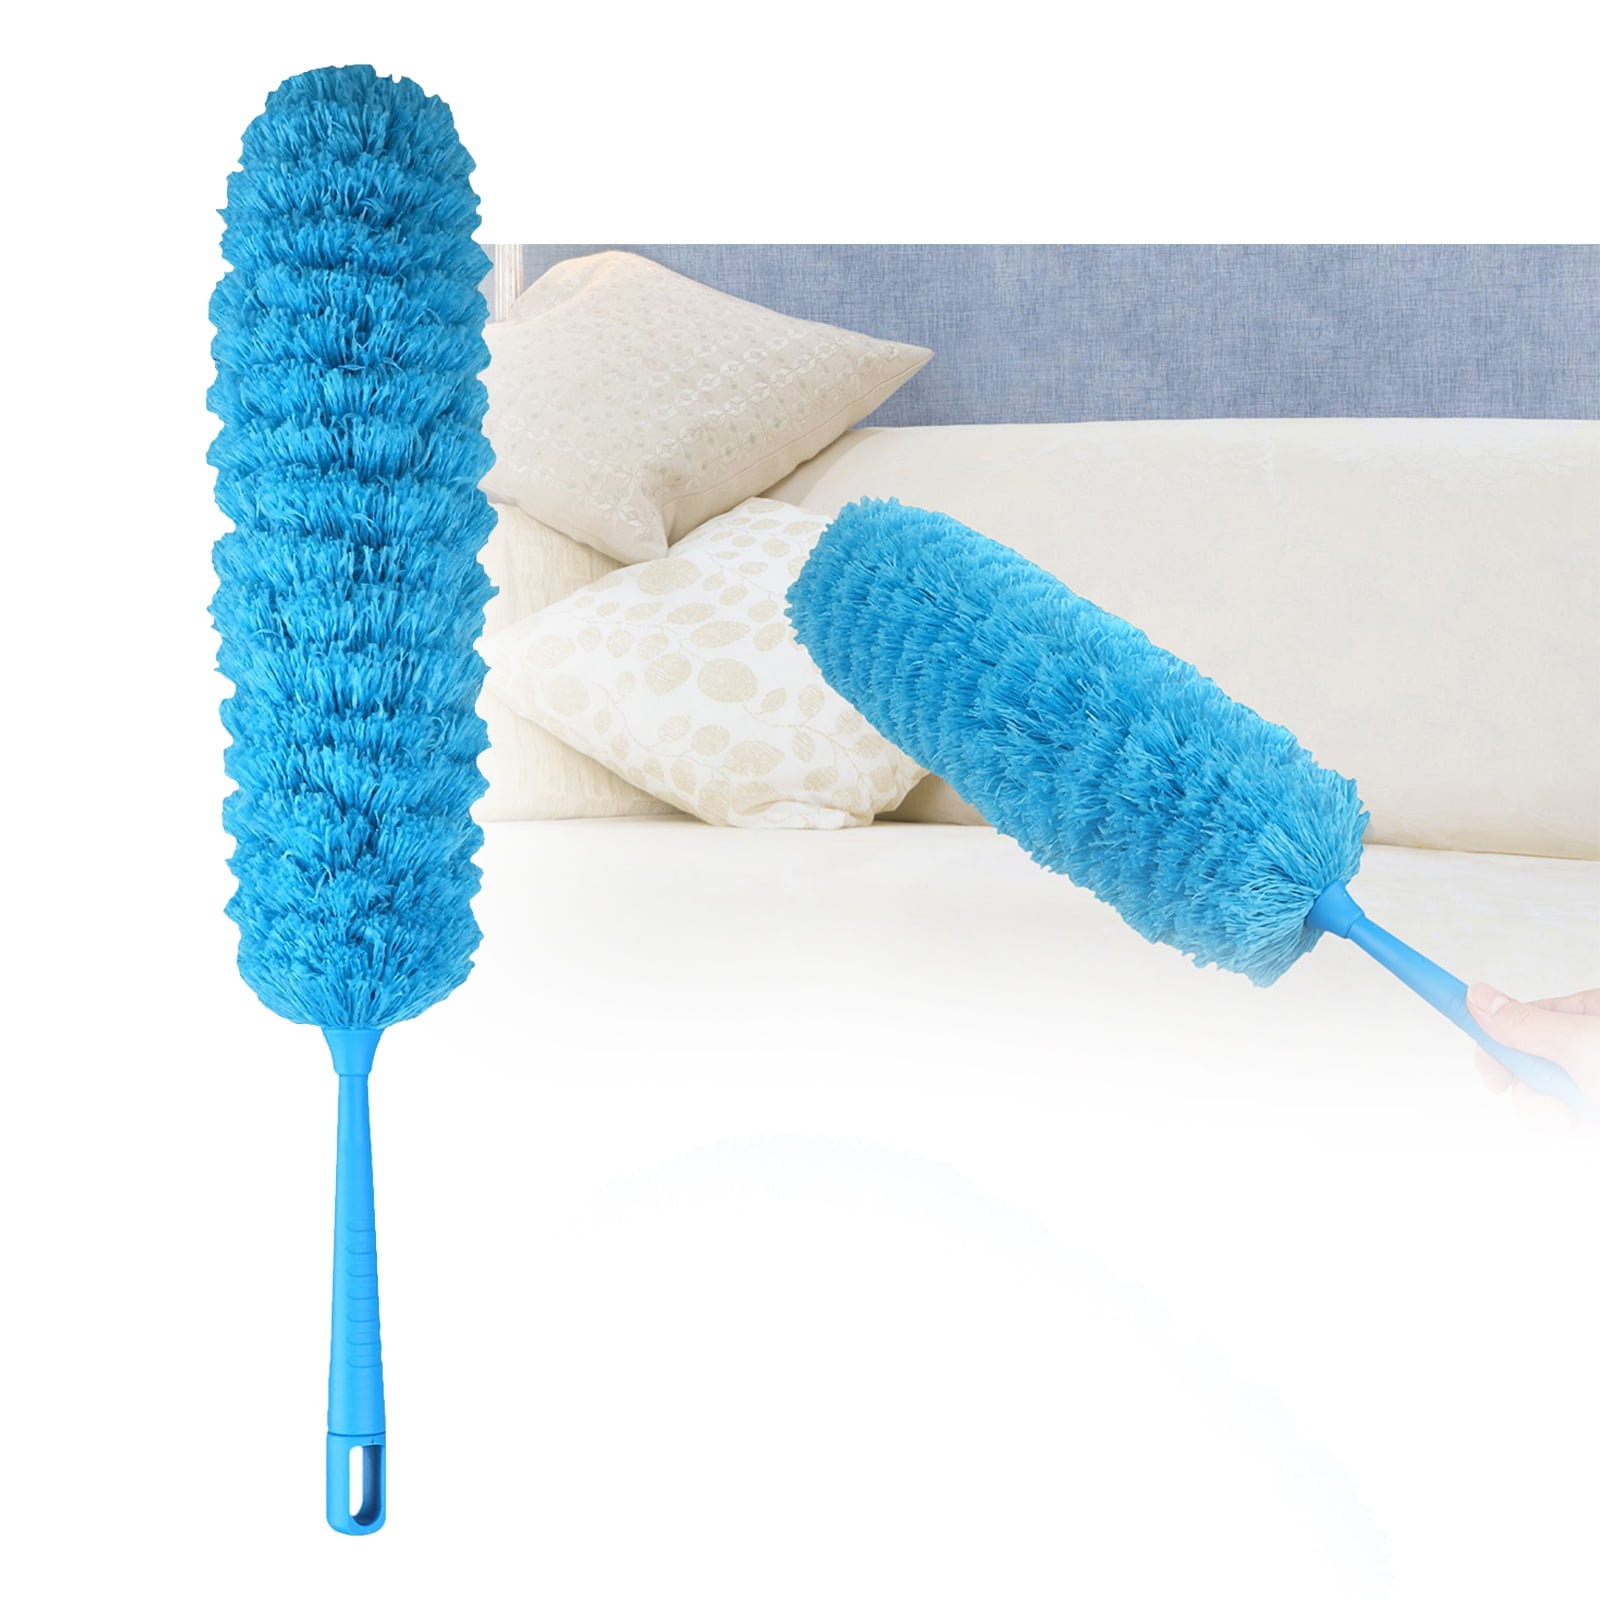 New Duster Brush Microfiber Anti Static Feather Household Cleaning Tool Plastic 